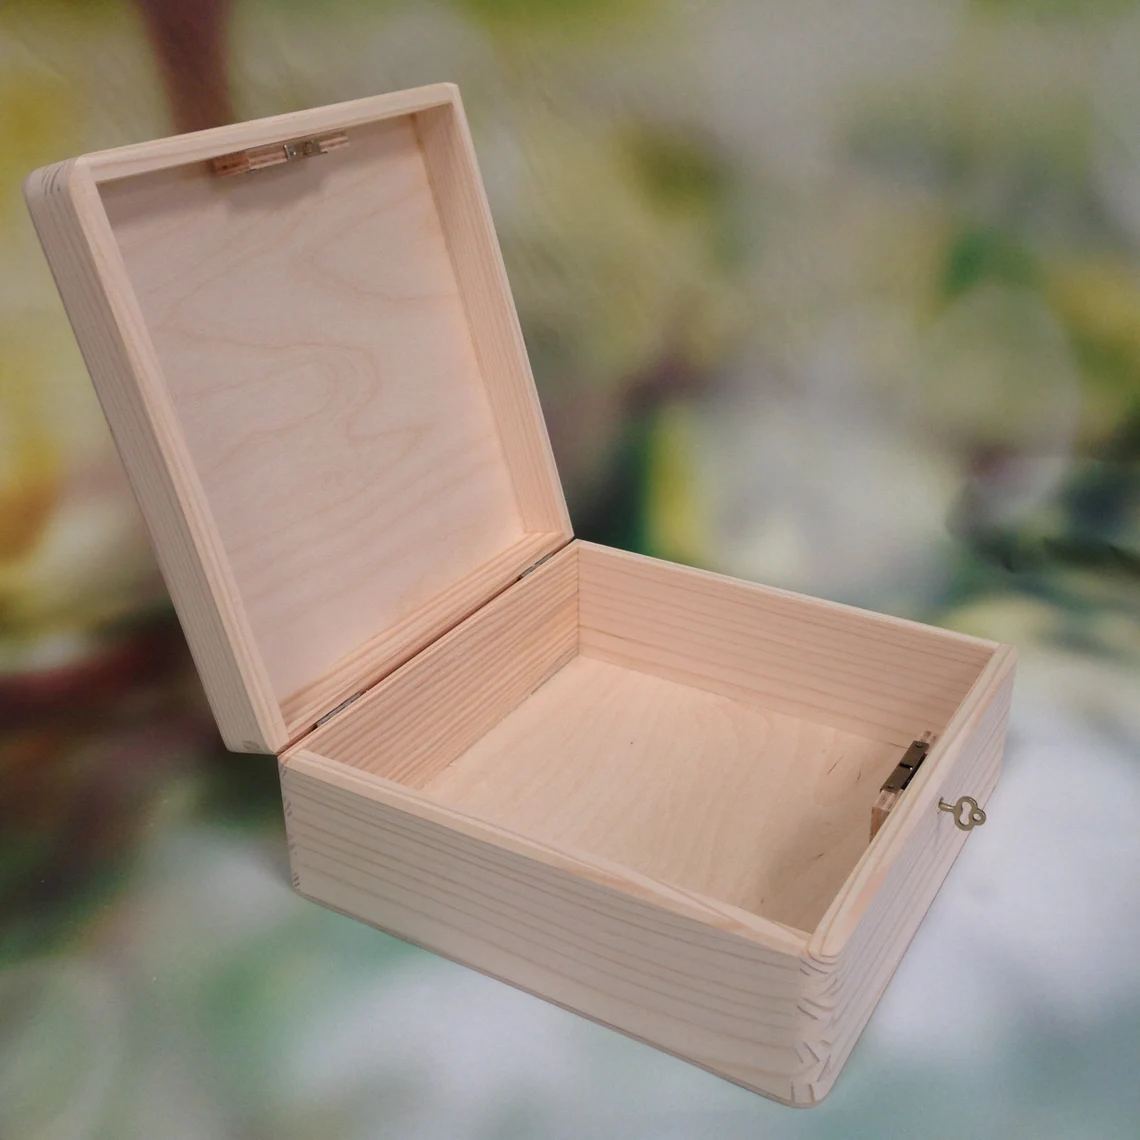 Lockable Natural Wooden Box With Lid - Side View - Box Open